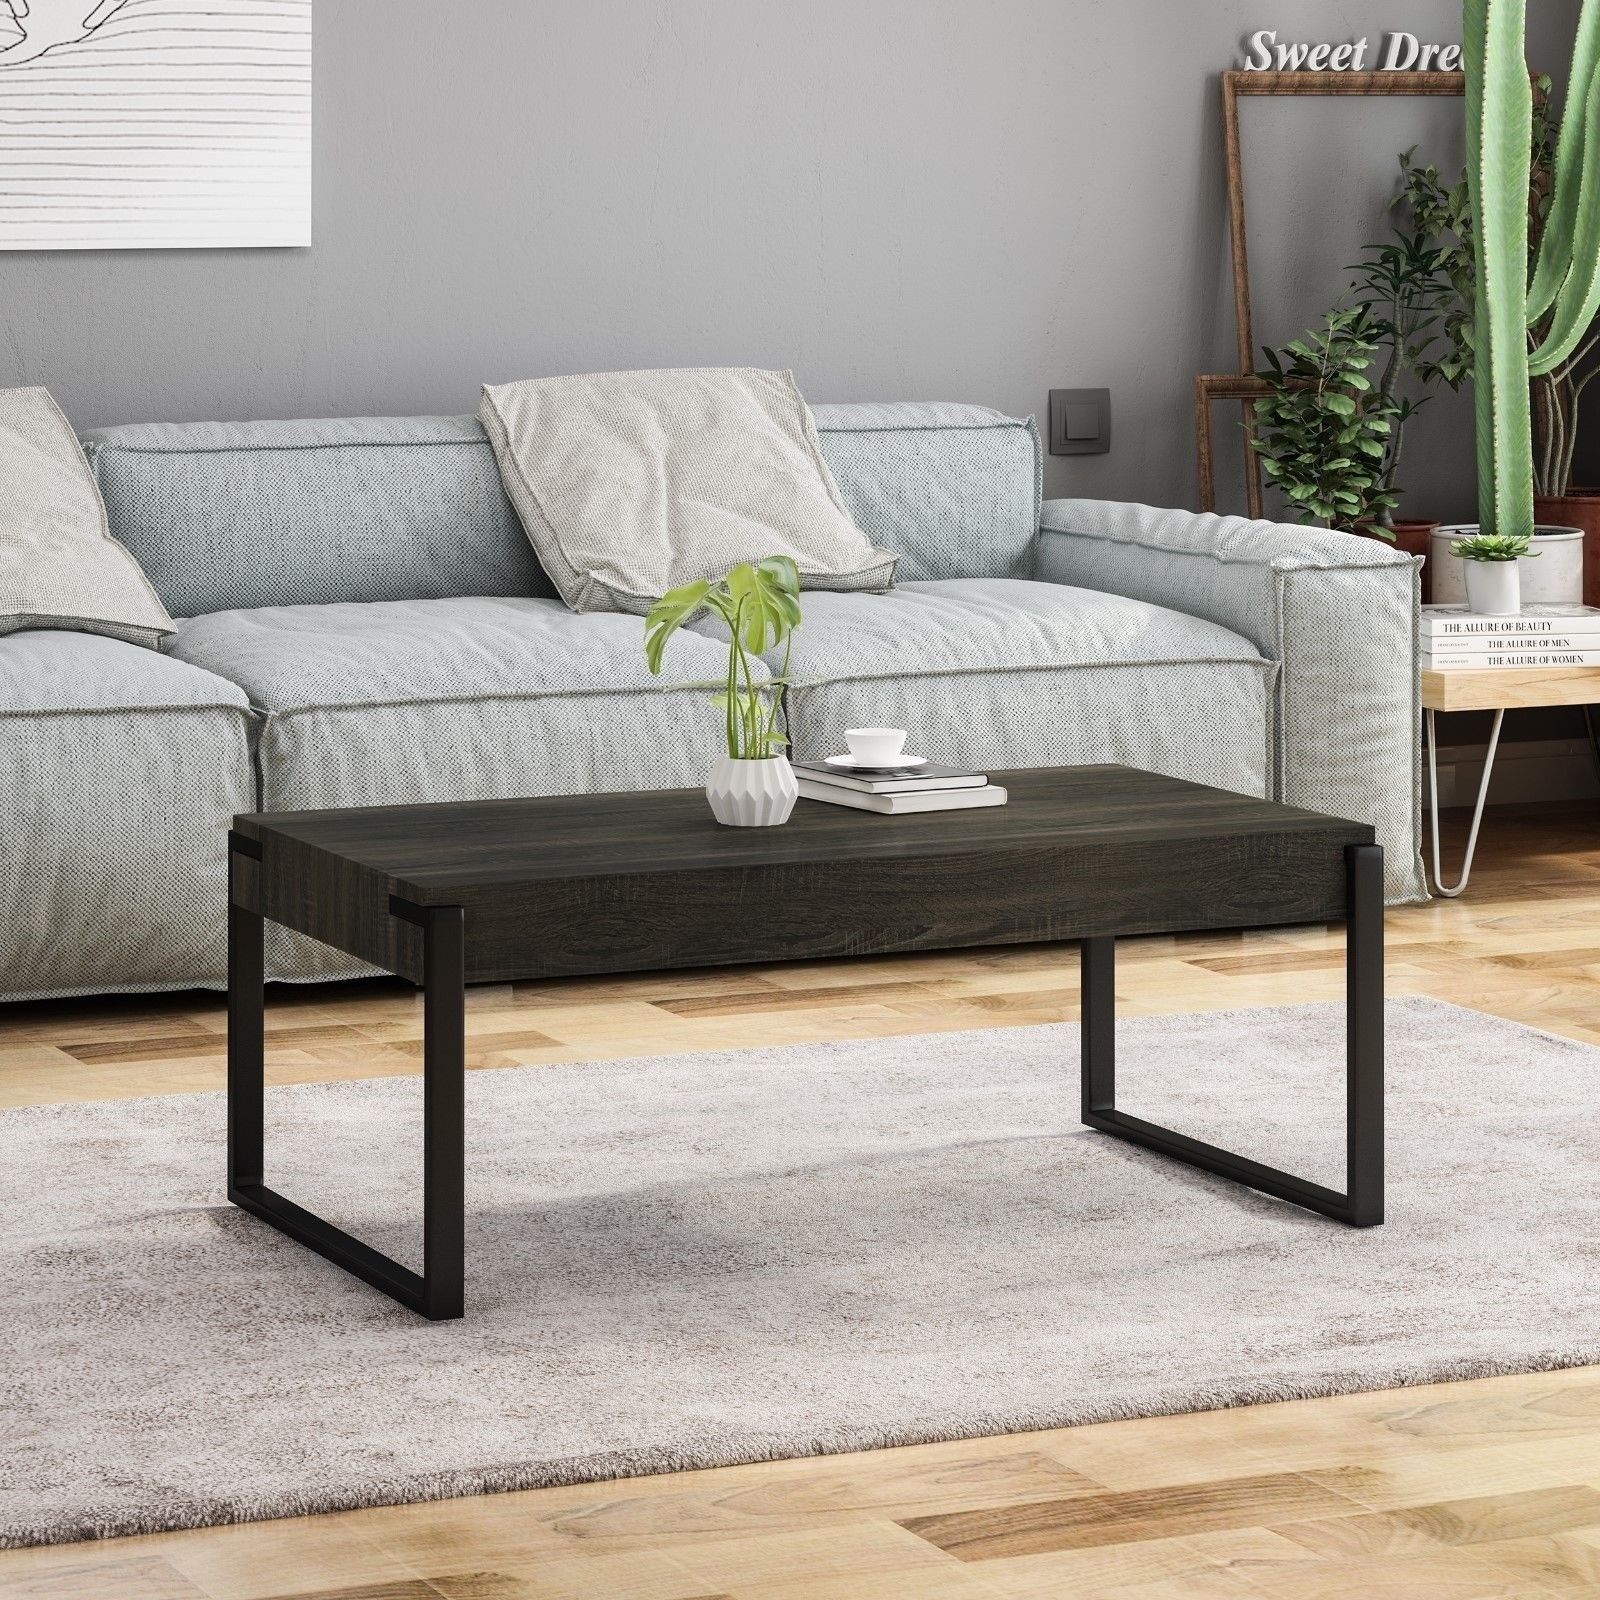 Shaw Modern Contemporary Industrial Faux Wood Coffee Table With Iron Legs |  Ebay In Industrial Faux Wood Coffee Tables (View 2 of 20)